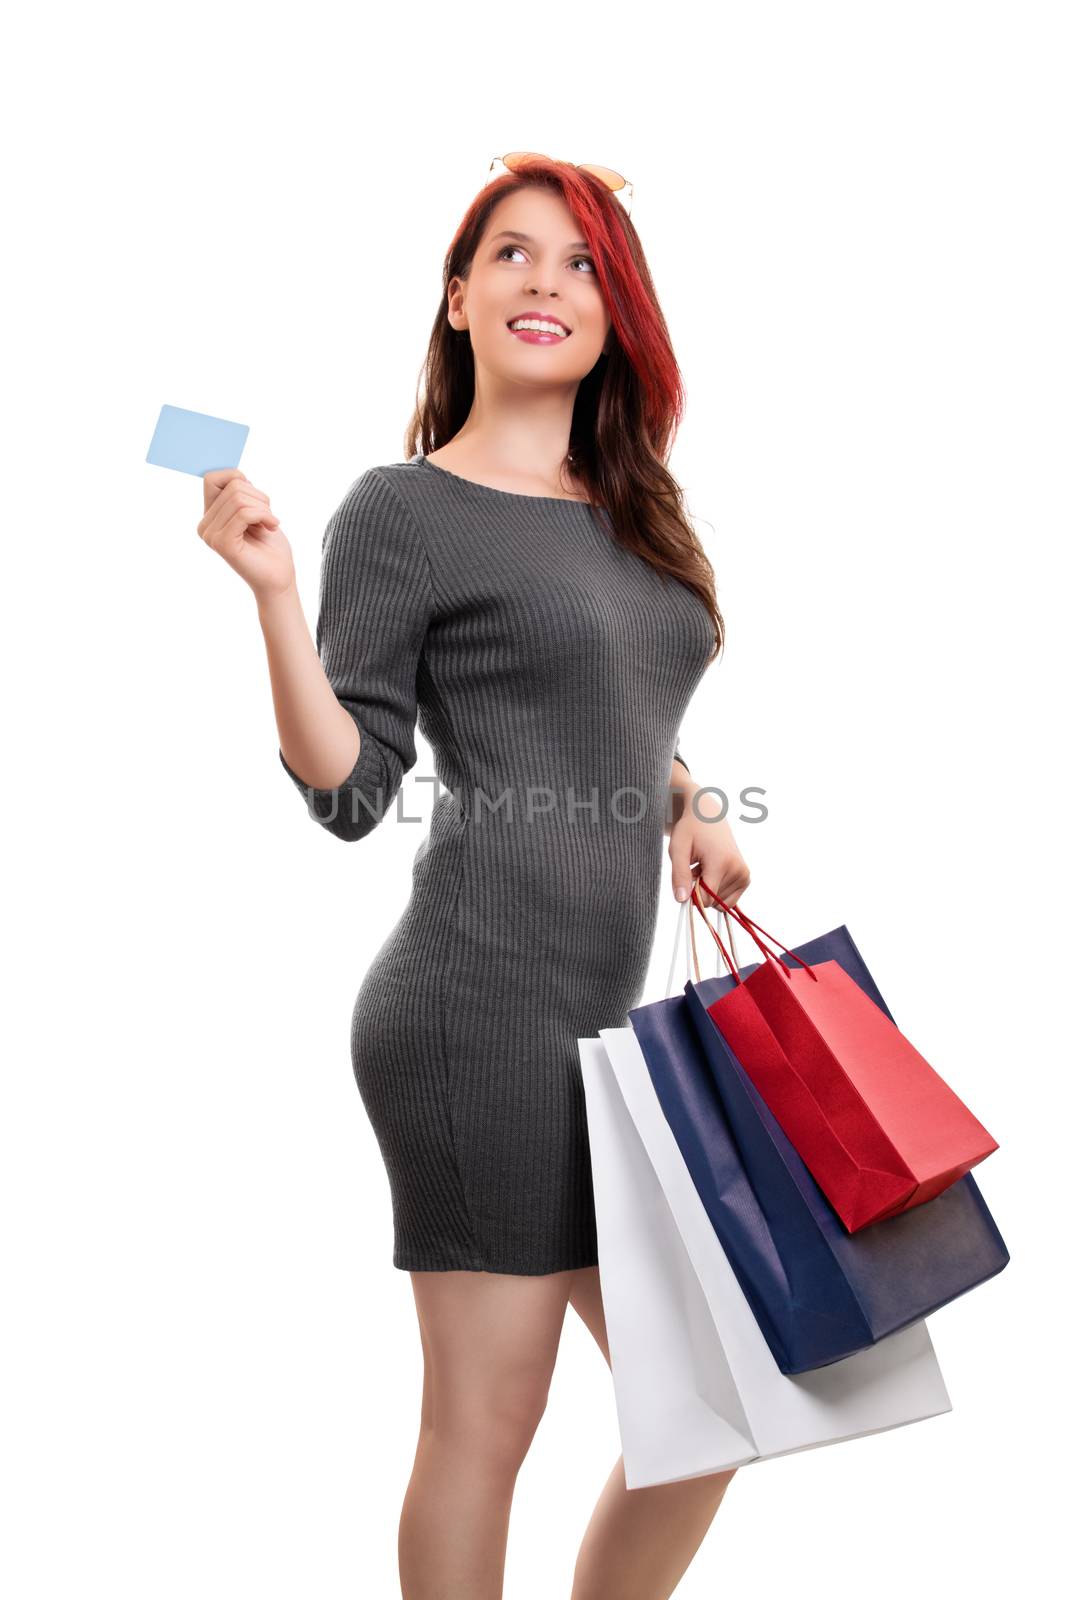 Young girl holding shopping bags and a blank card by Mendelex